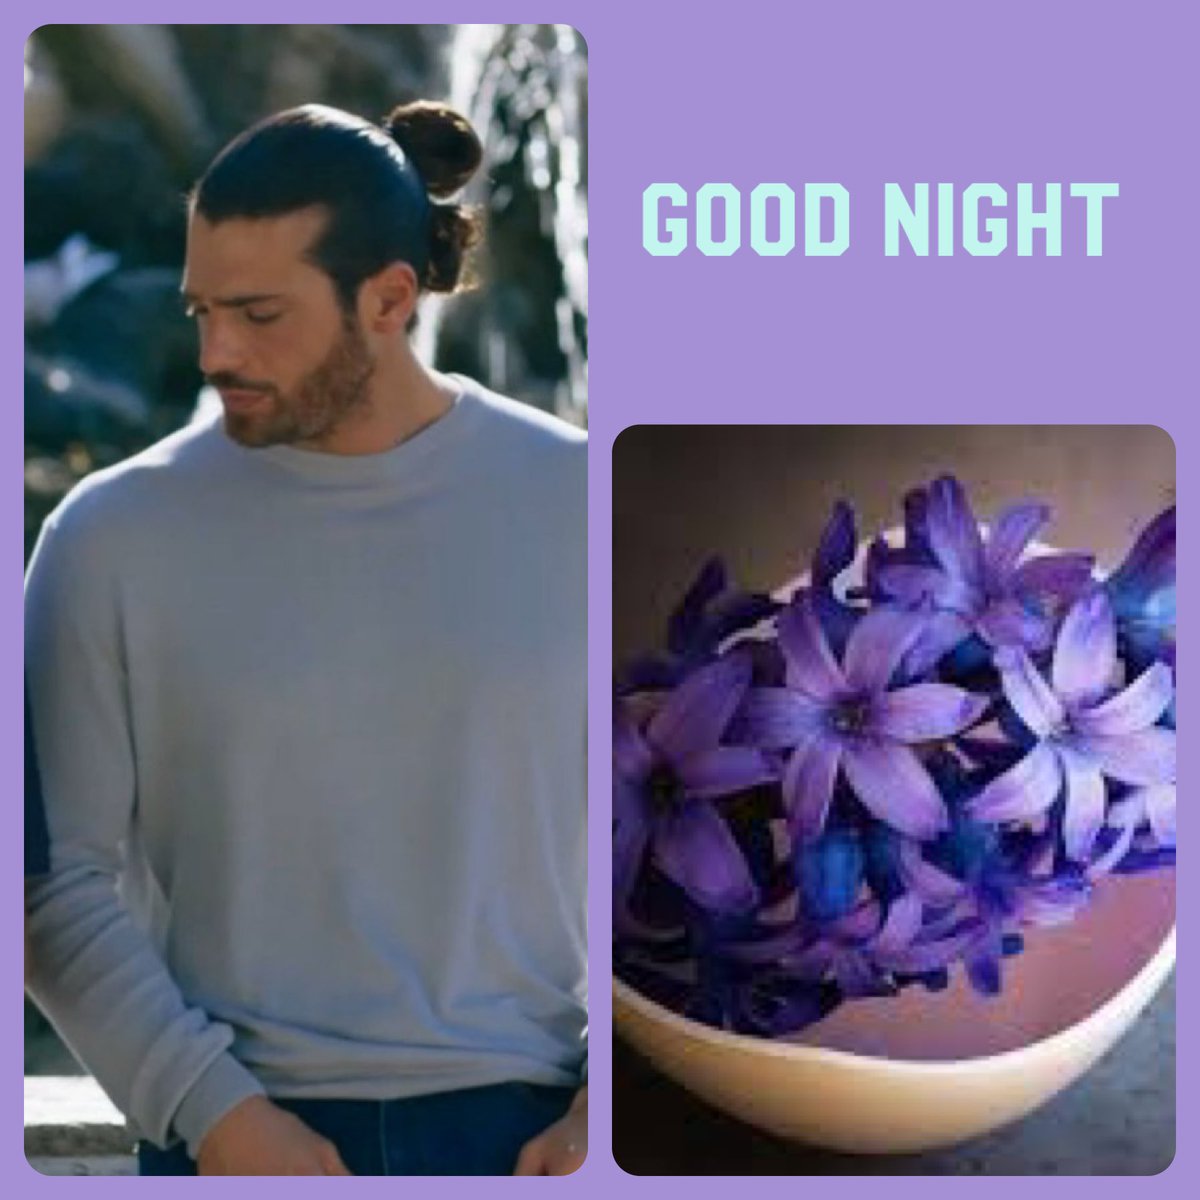 Good Afternoon〰️Evening Fandom The CYET sends you Good Night Wishes. Hoping the challenges of the day were conquered and Happiness lights up your evening. #CanYaman #Sandokan #ViolaComeilMare2 CanYamanEnglishTeam